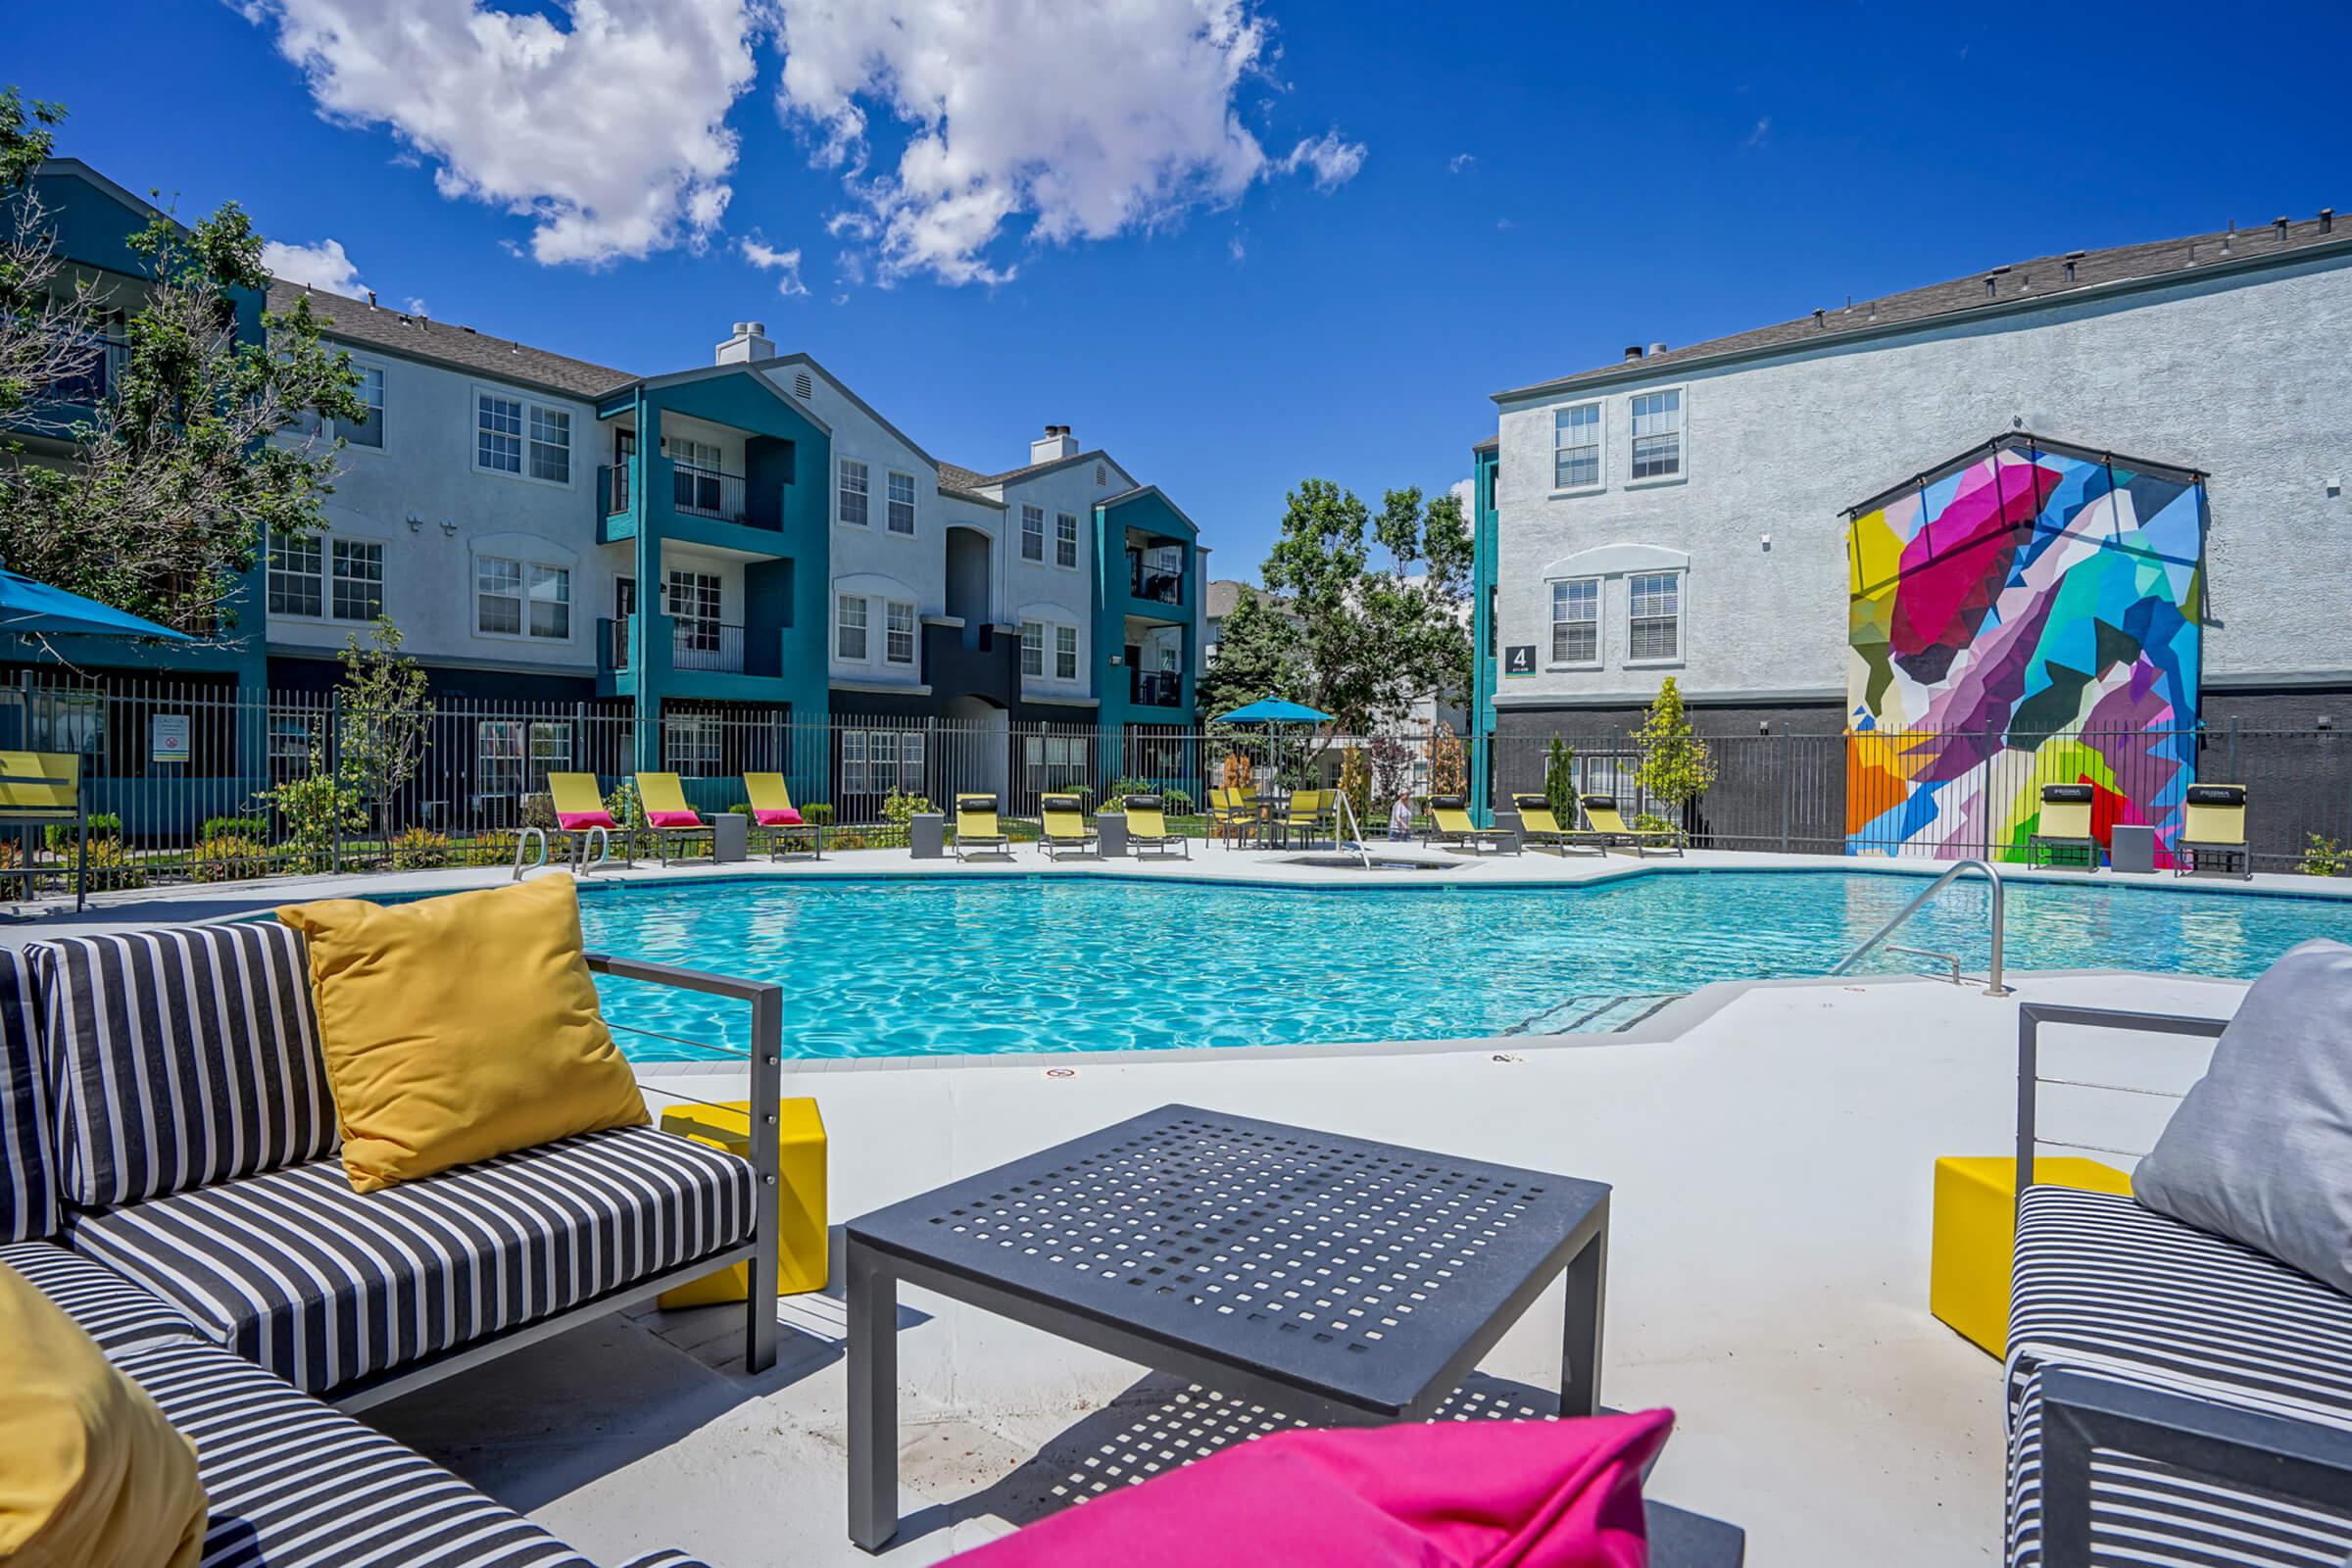 Poolside Lounge with Resort-style Furniture - Prisma Apartments - Albuquerque - New Mexico